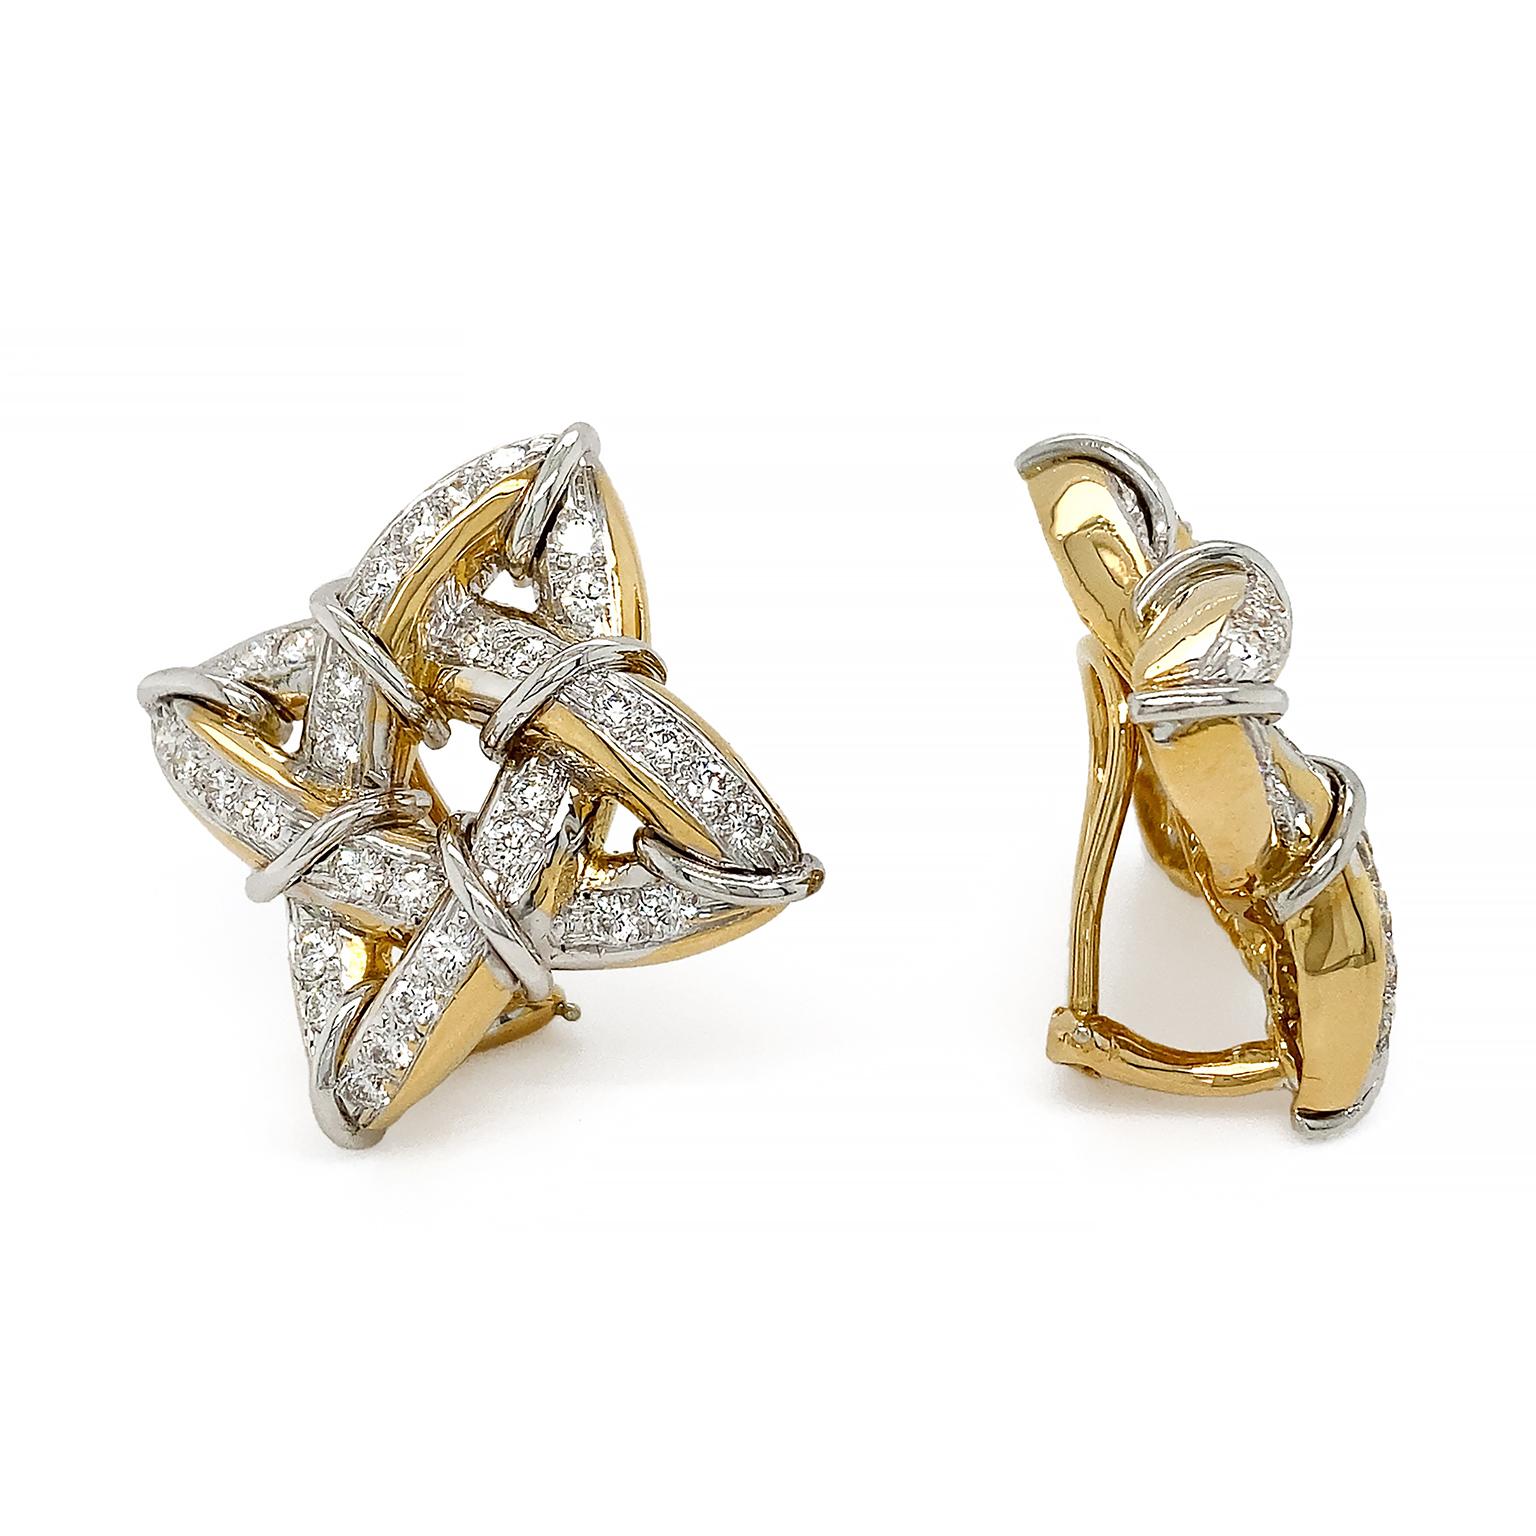 The timeless gothic motif is the inspiration for these earrings. A triangular accented knot of 18k yellow gold features a row of brilliant cut diamonds set in platinum across the top. Platinum wires wrap around the sides, while the sheen of gold is